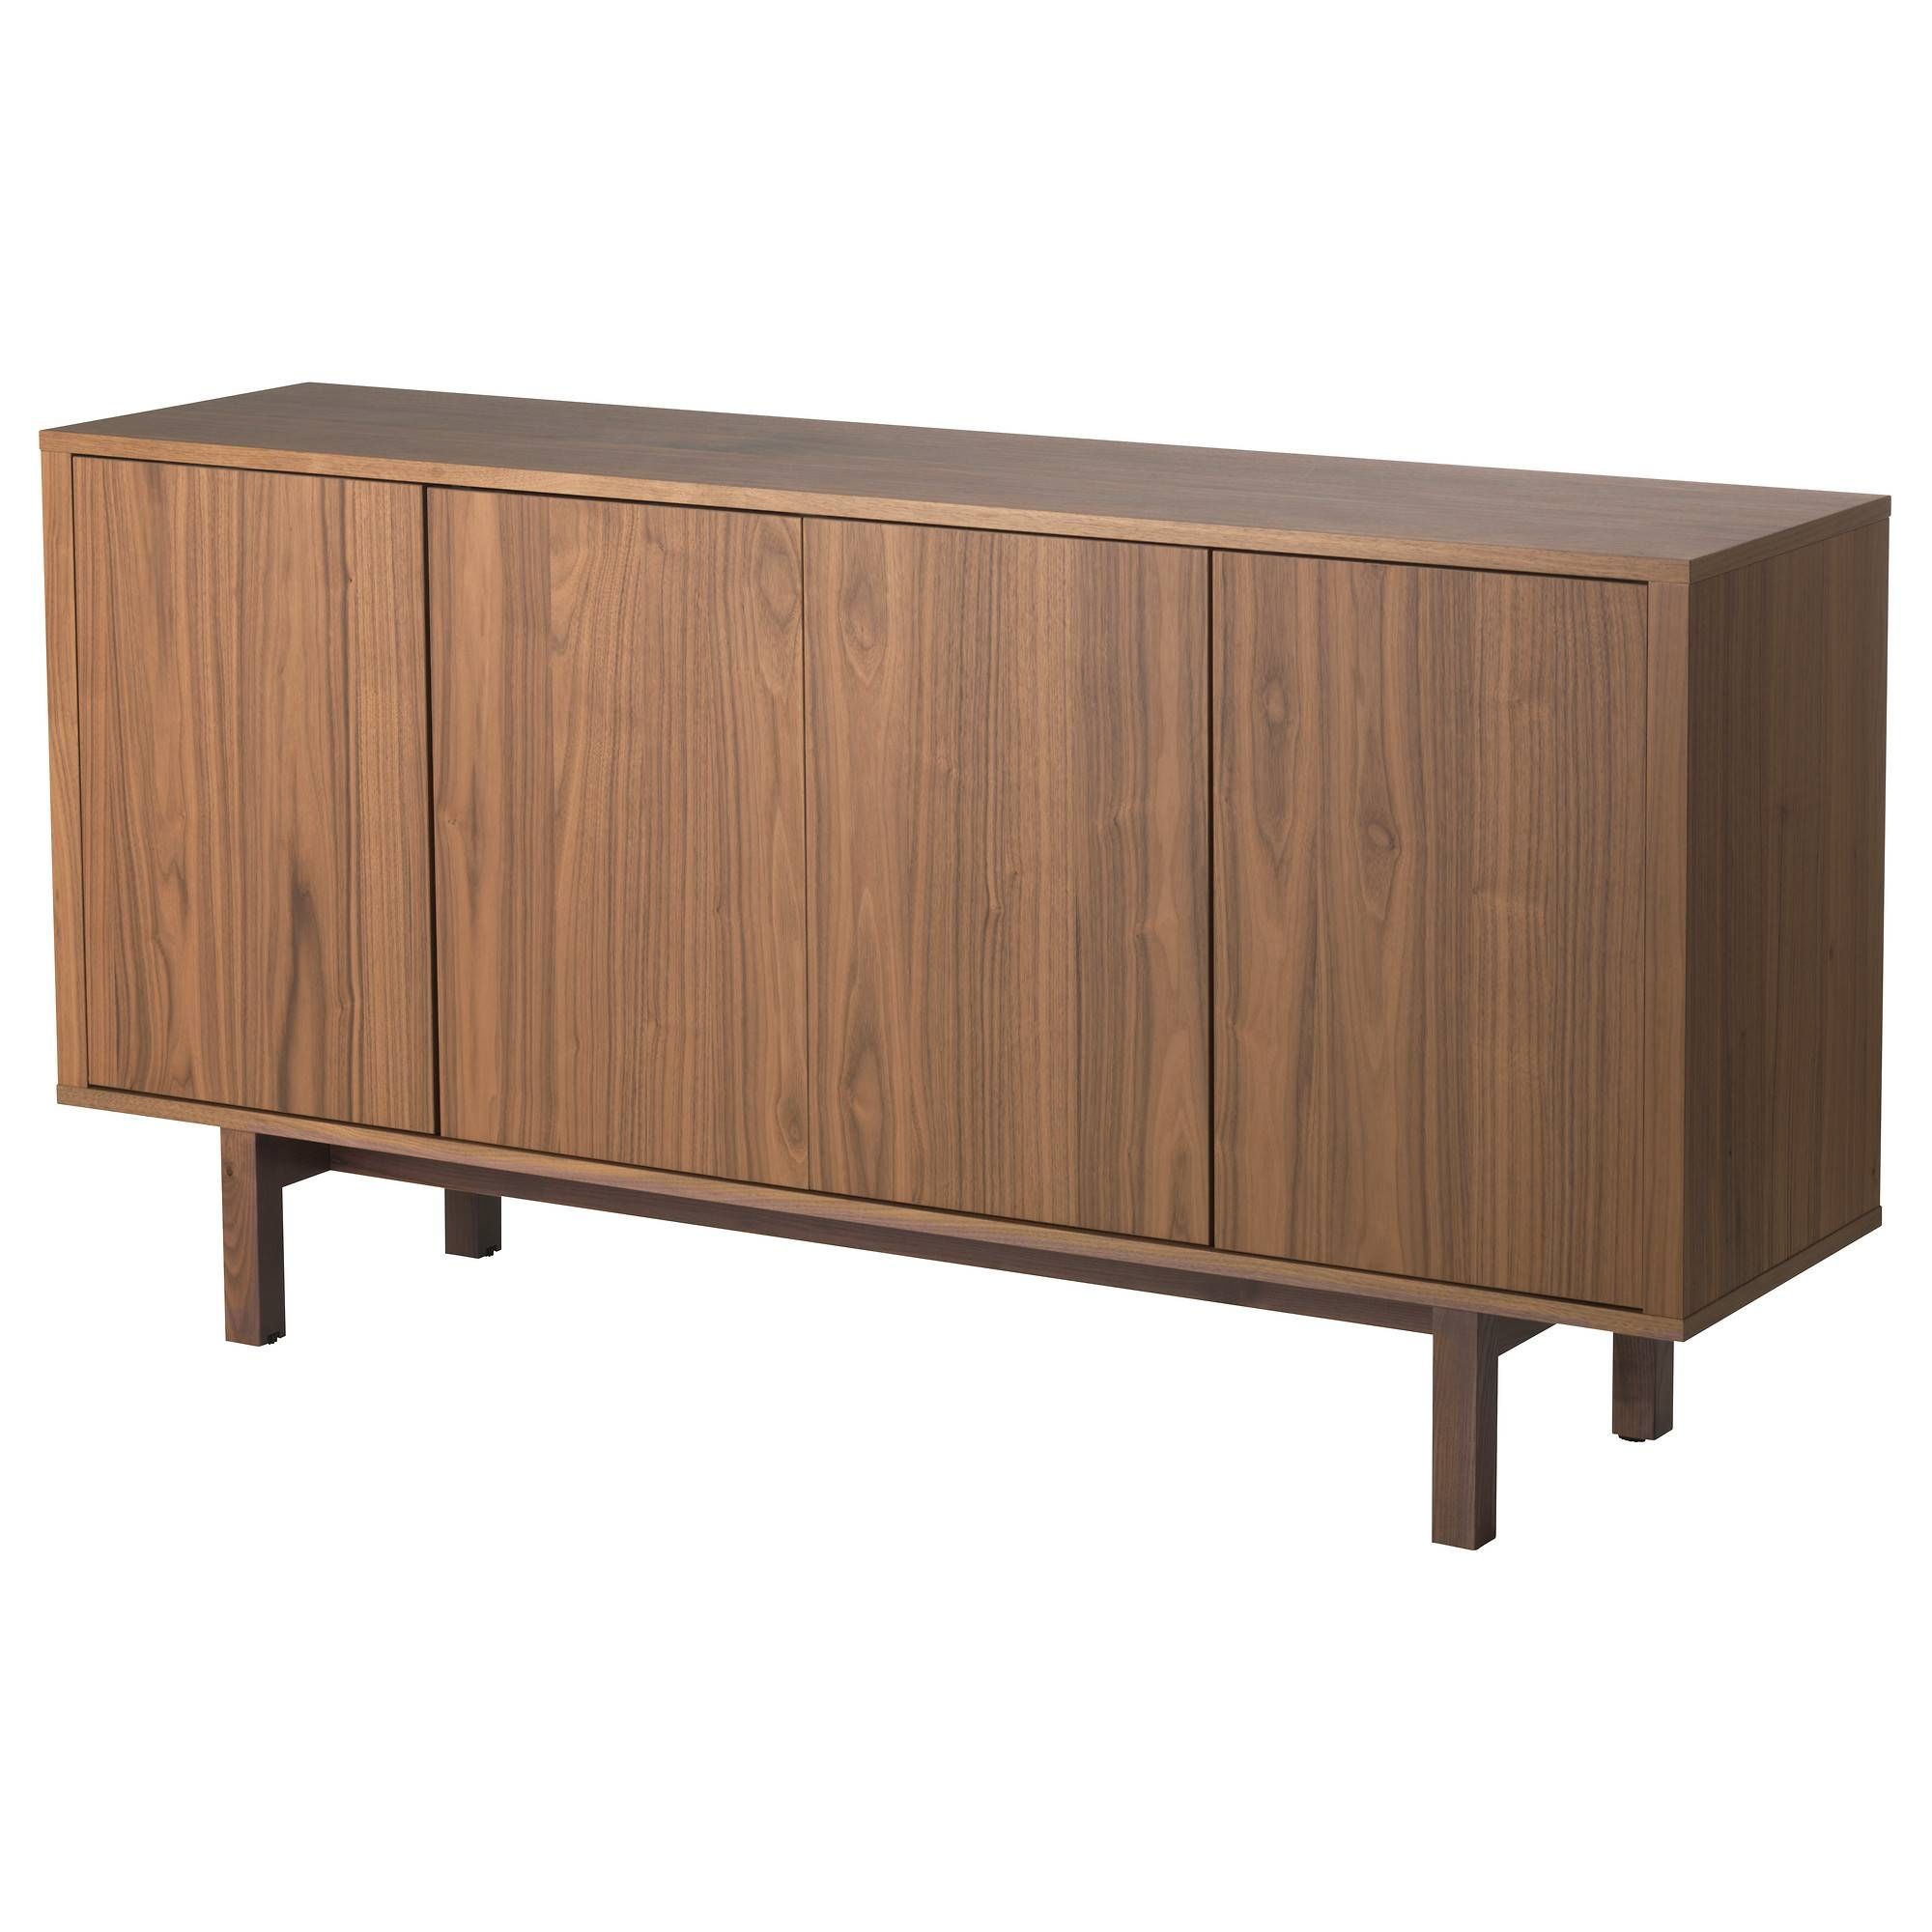 Stockholm Sideboard – Ikea Intended For Latest Canada Ikea Sideboards (View 6 of 15)